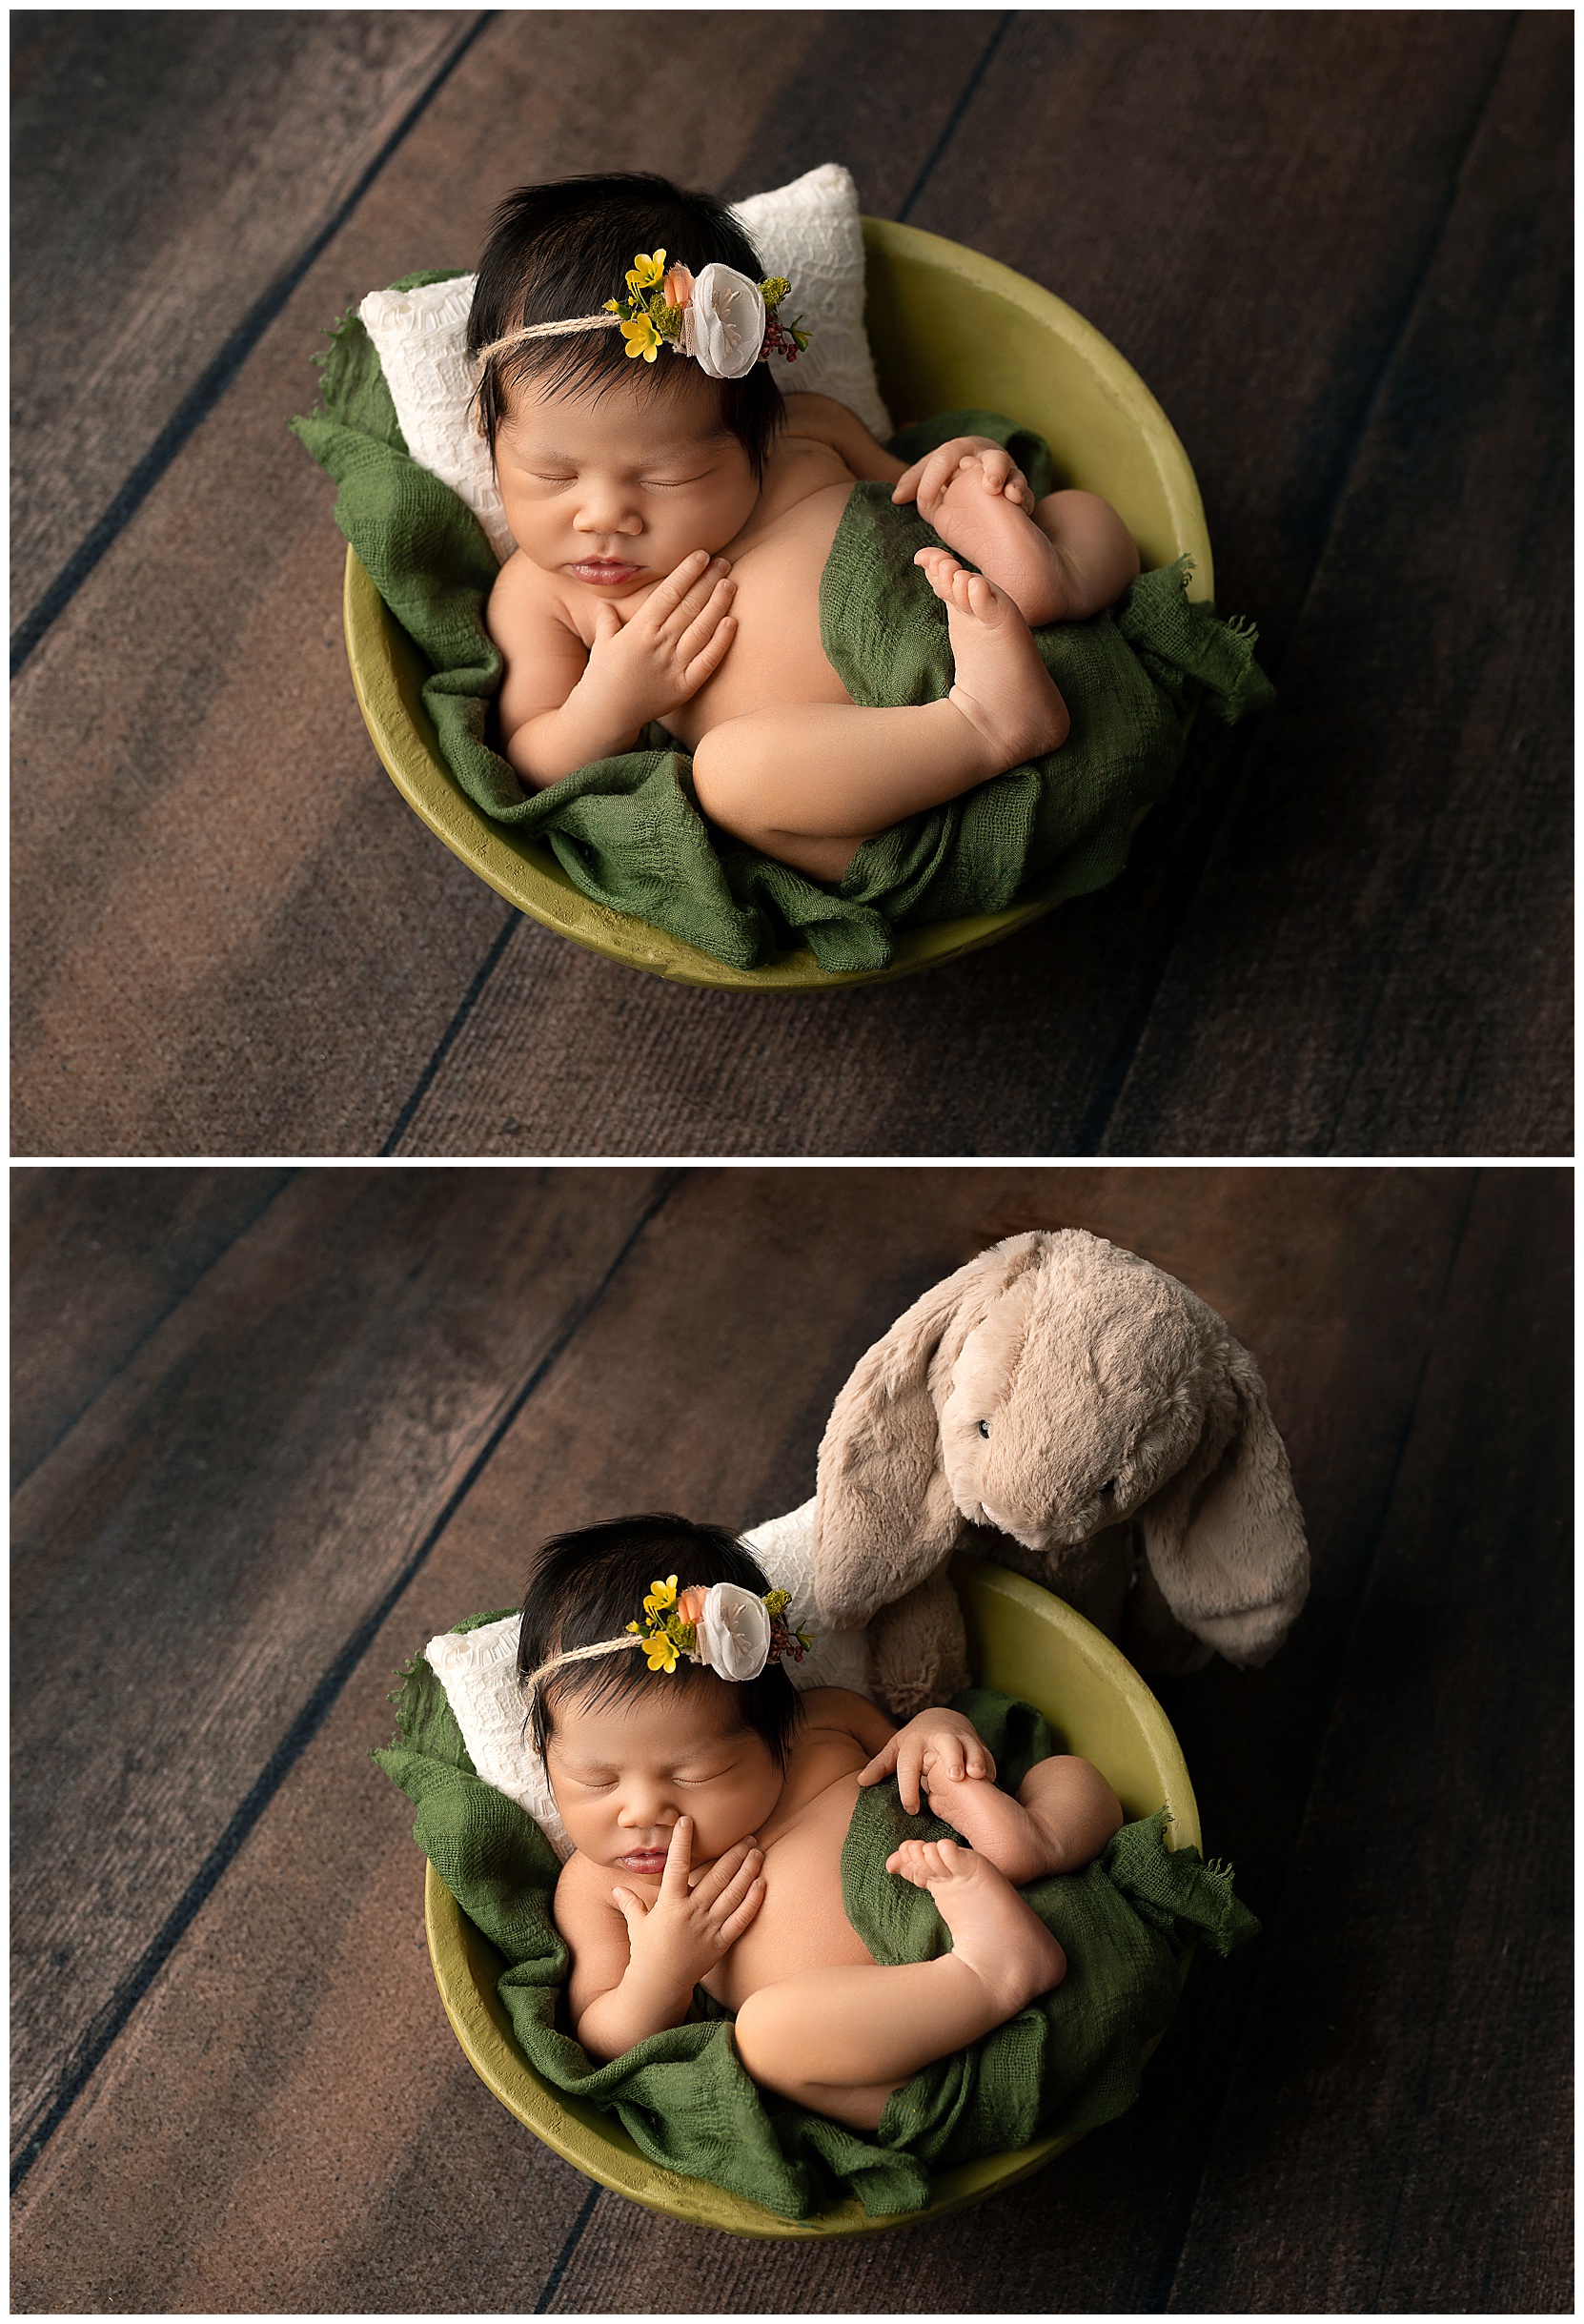 Two images of a newborn baby wrapped in a green blanket and propped in a green bowl. In the second image, a stuffed bunny rabbit looks on from the side.